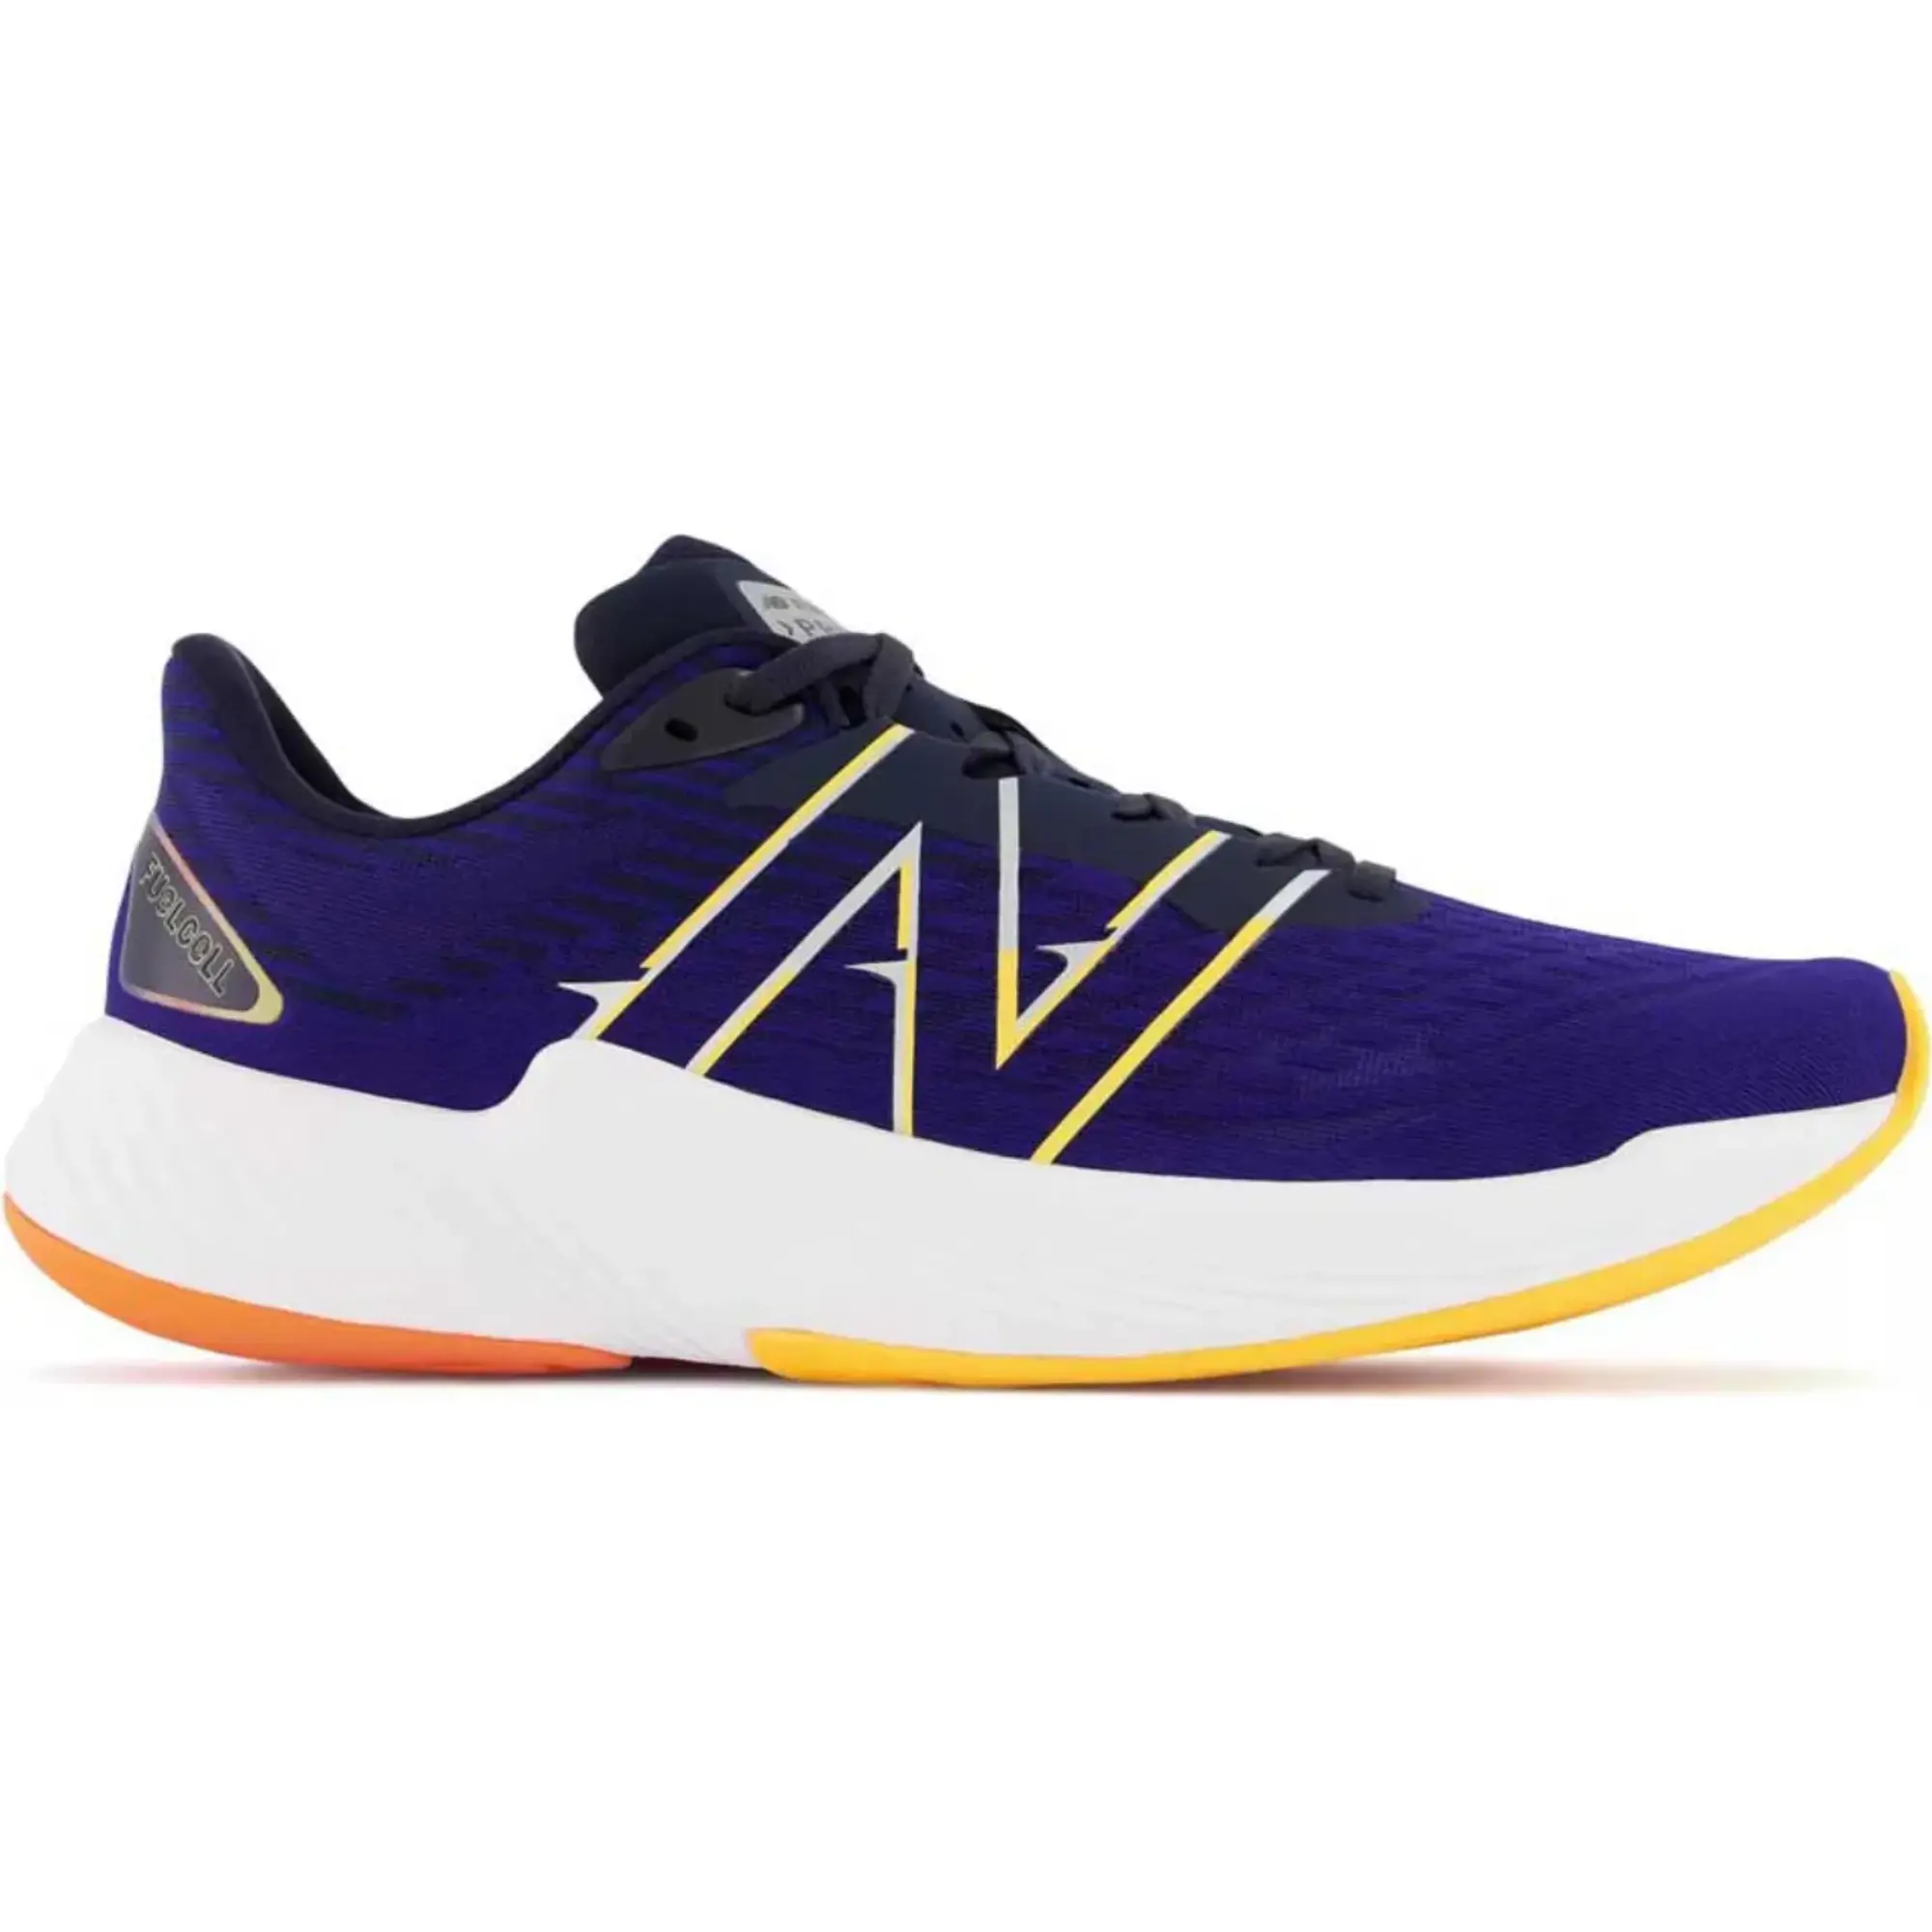 New Balance Mens FuelCell Prism V2 Neutral Running Shoes Navy/Orange